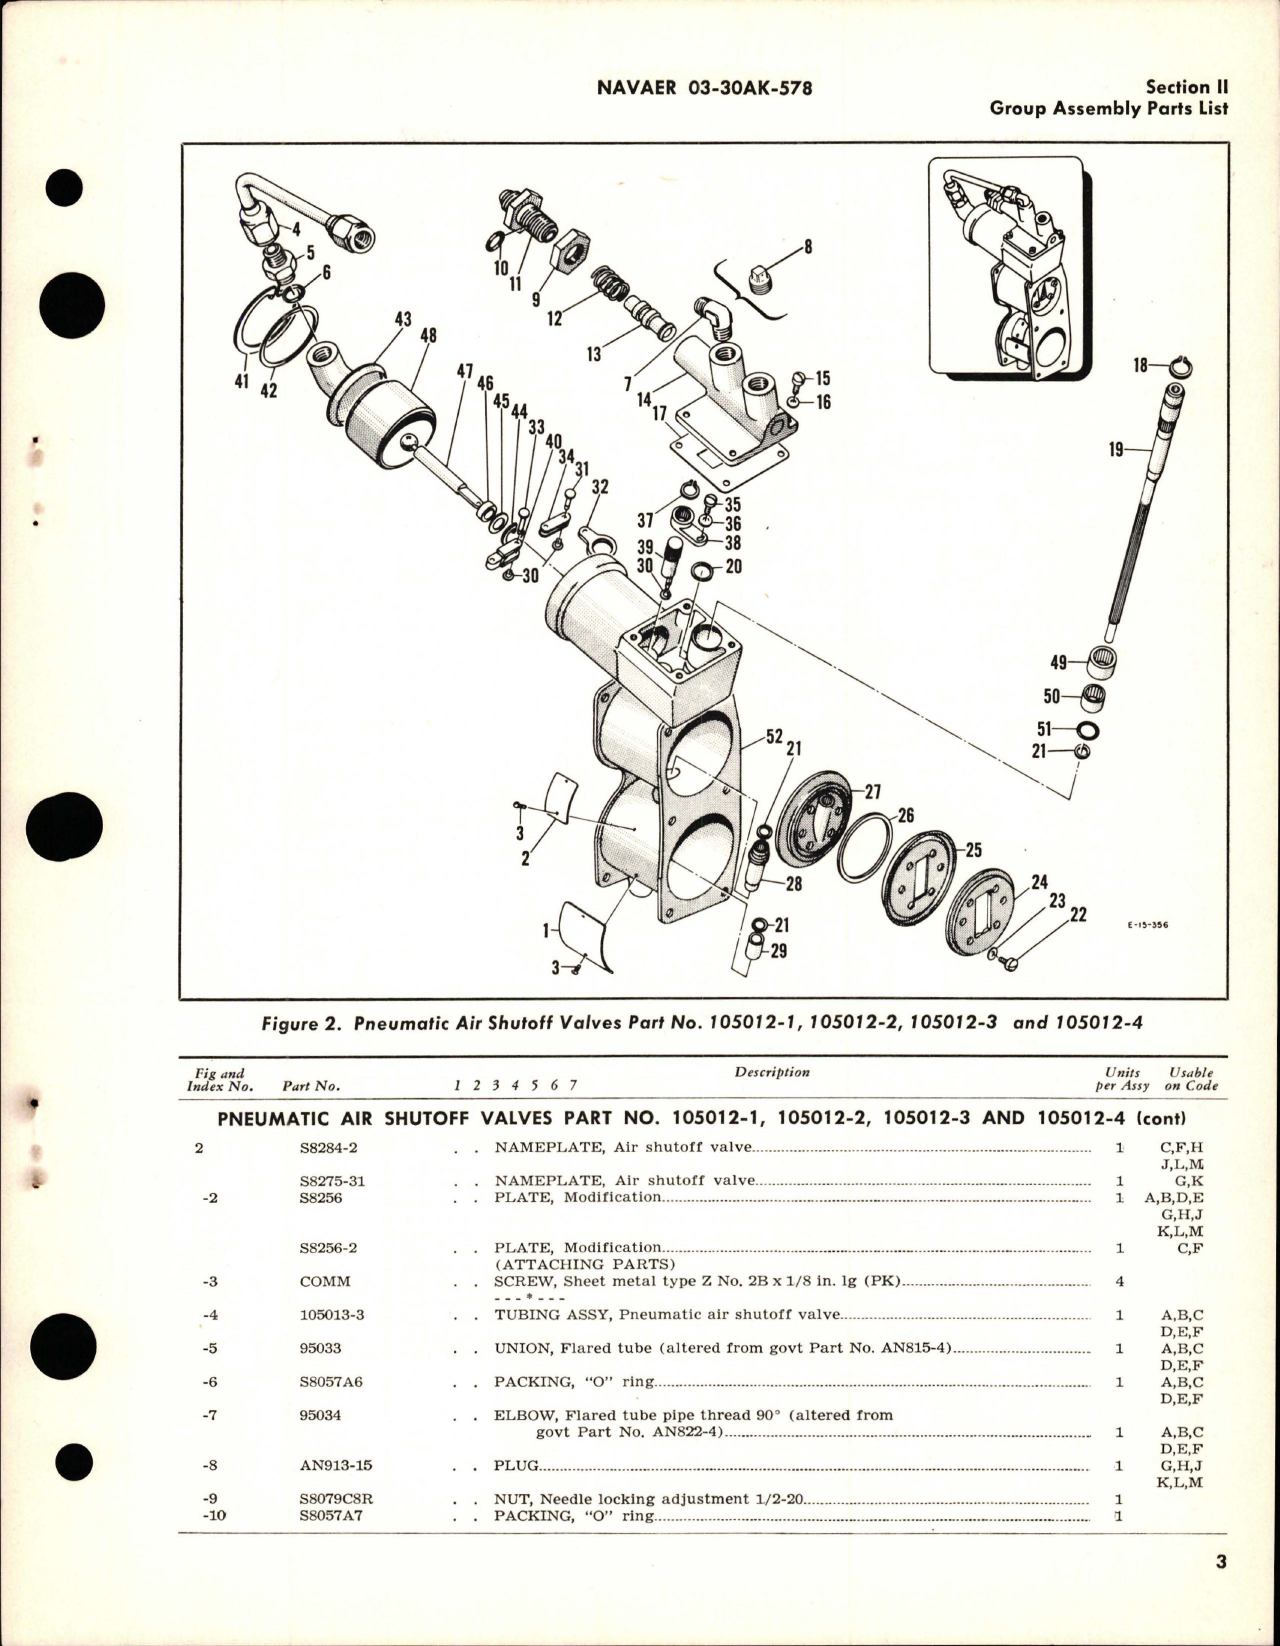 Sample page 5 from AirCorps Library document: Illustrated Parts Breakdown for Pneumatic Air Shutoff Valves 